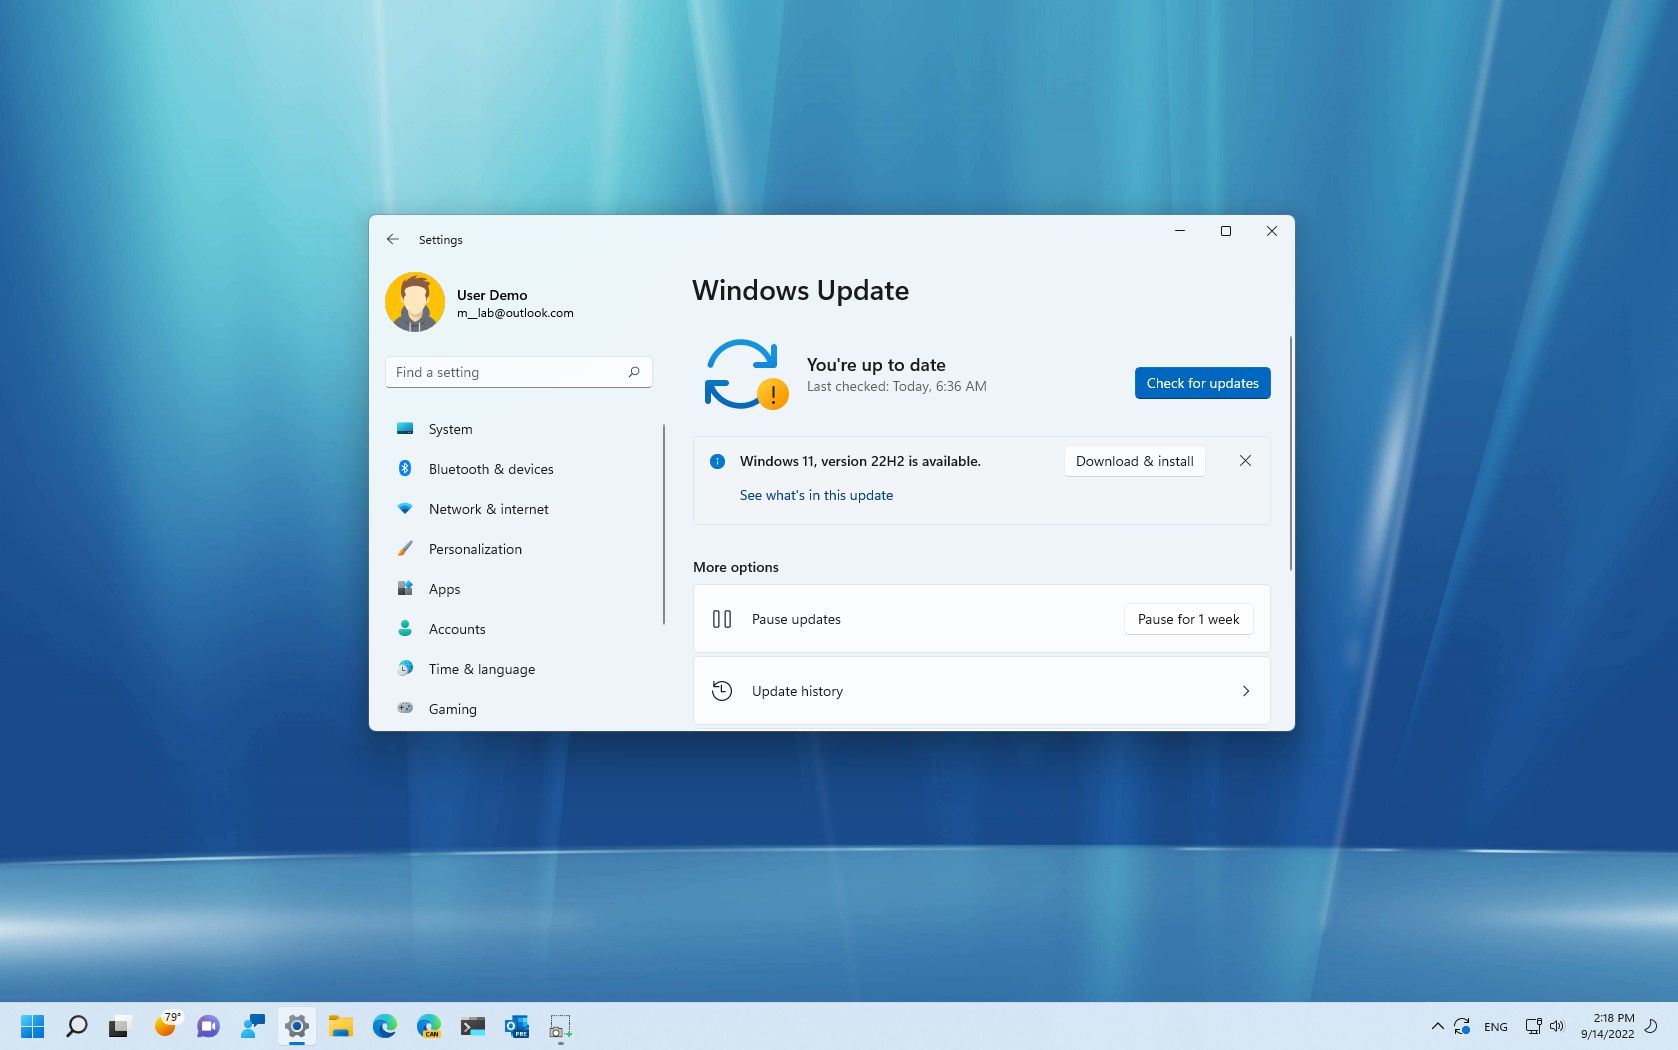 Before you know it, Windows 11 22H2 will be here